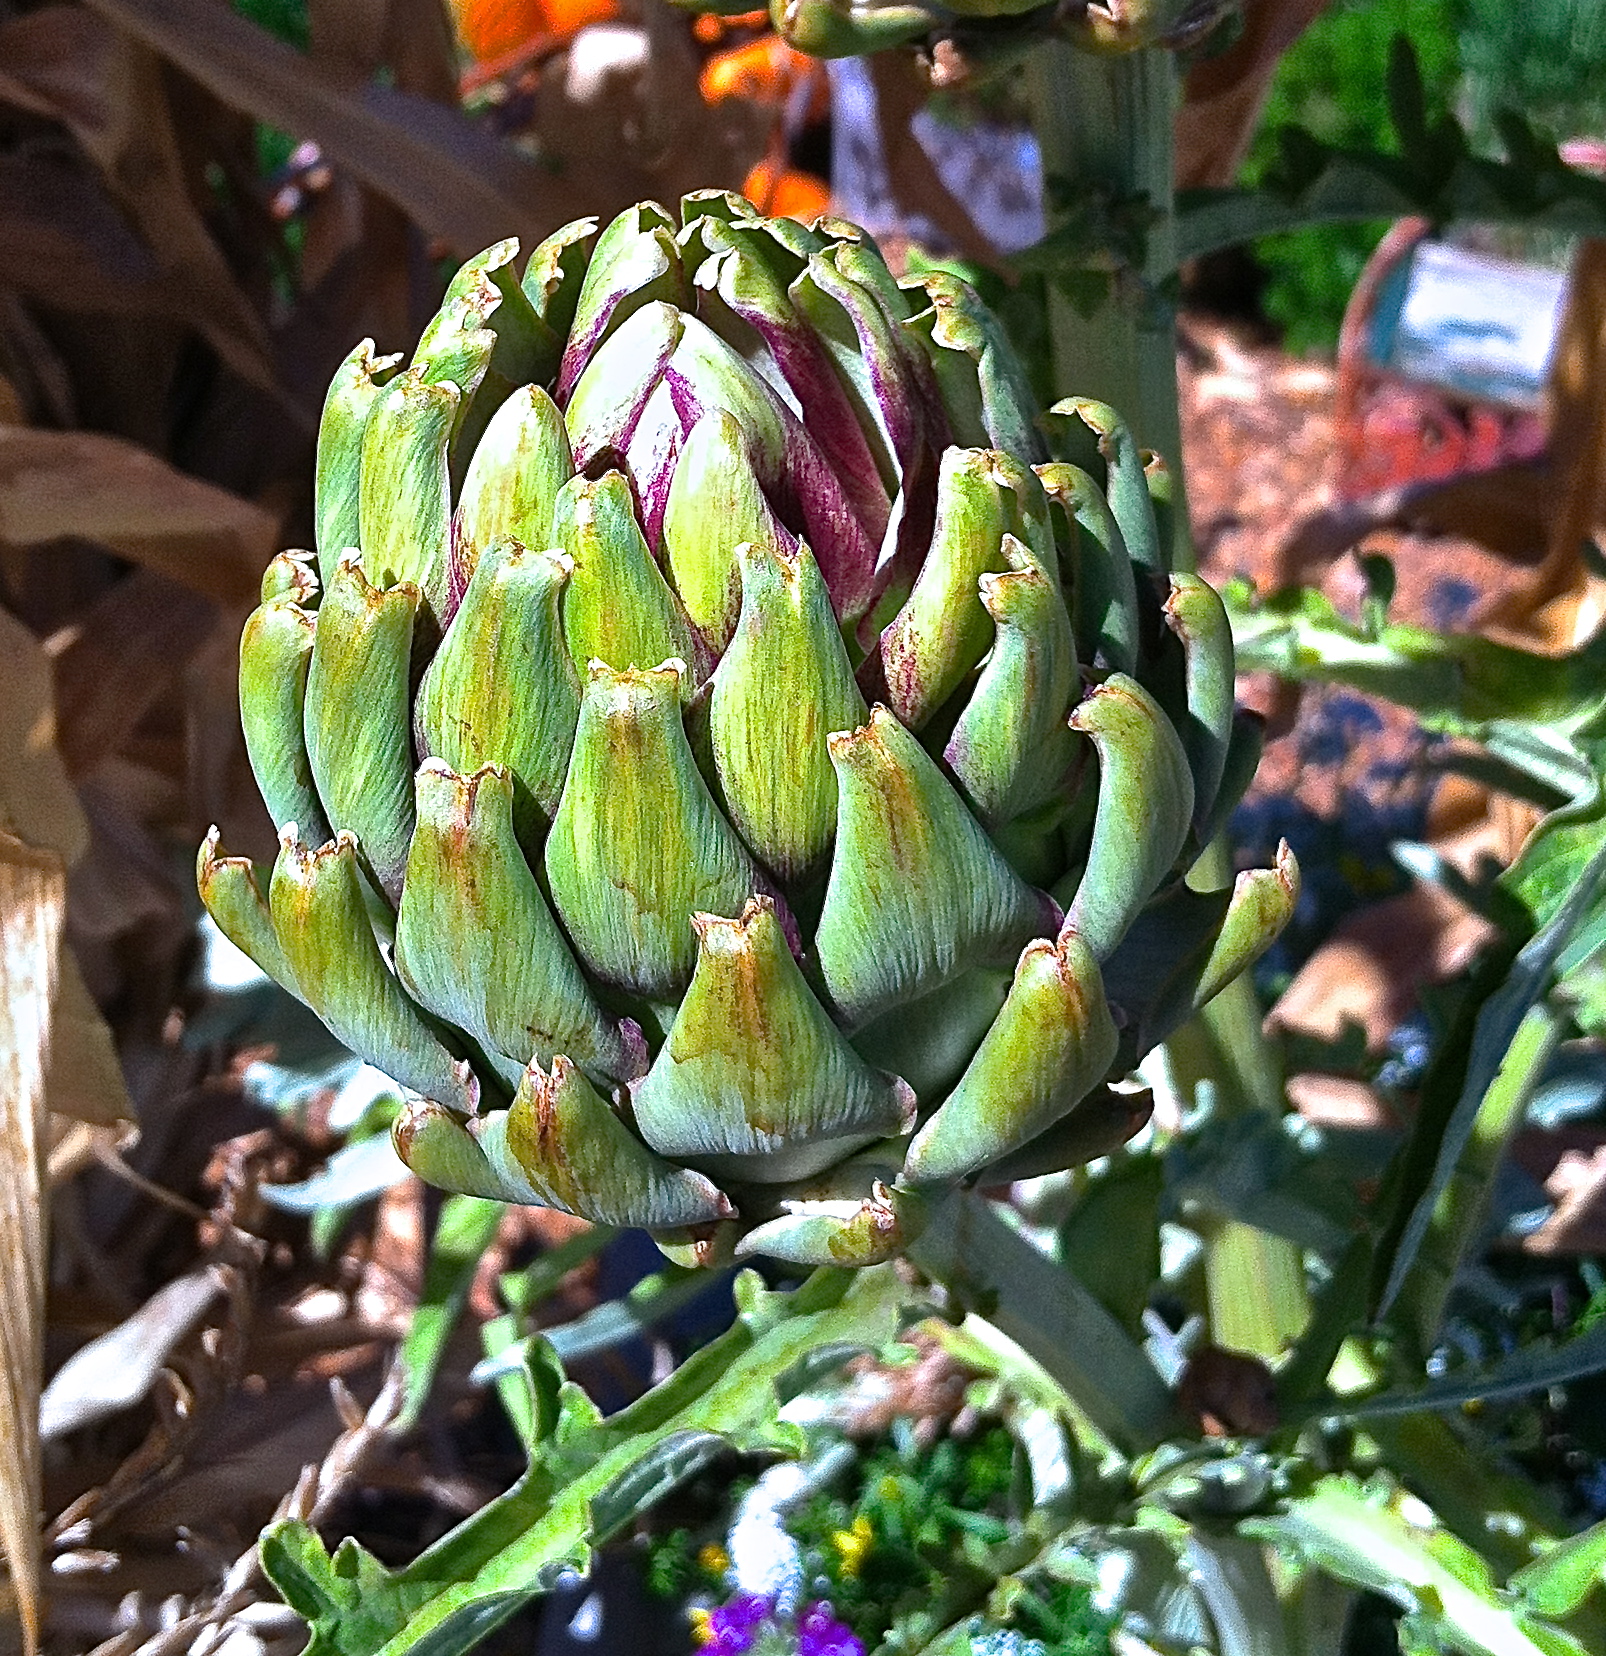 Artichoke, illustrating a food known by some only when crossing cultures